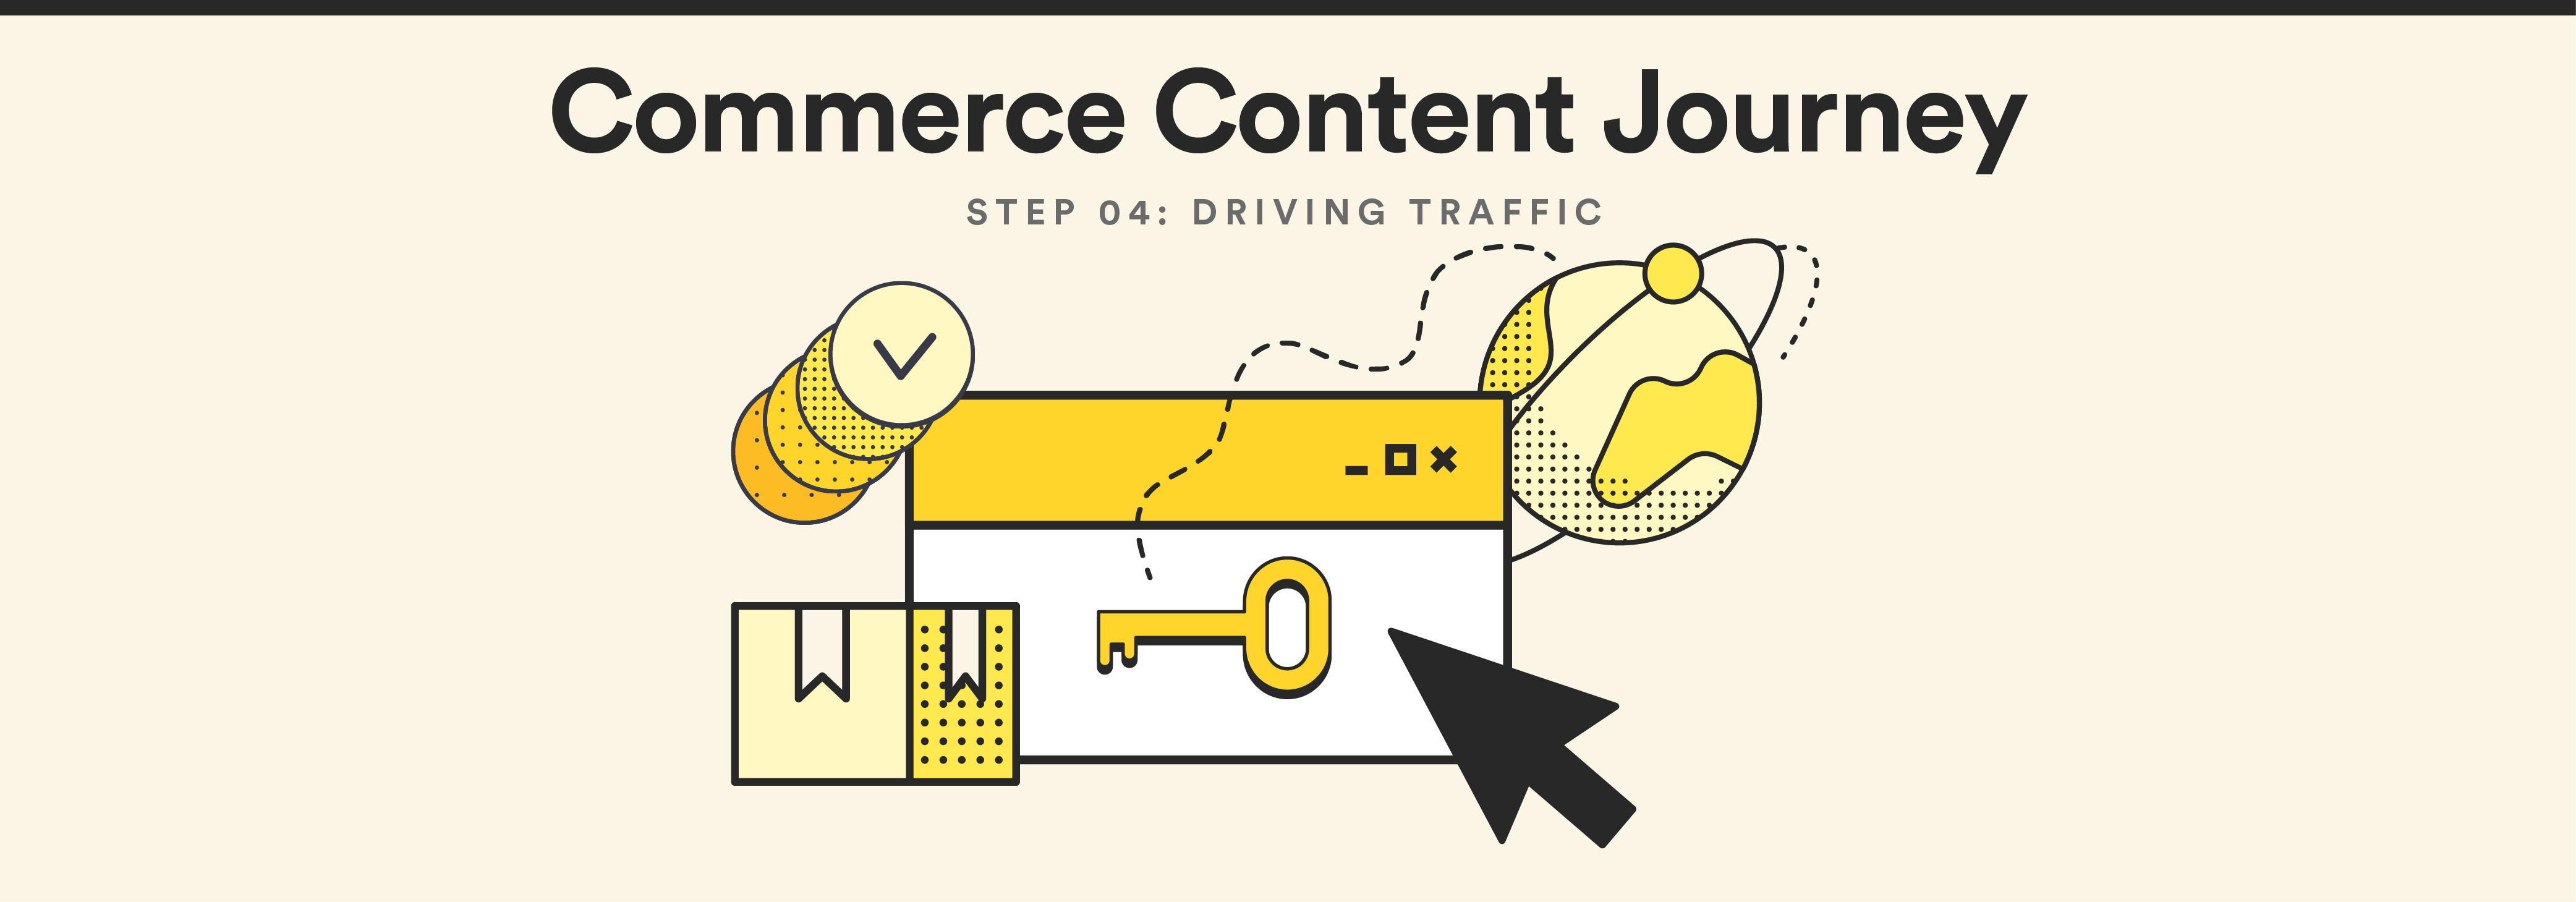 Commerce Content Journey: Driving Traffic